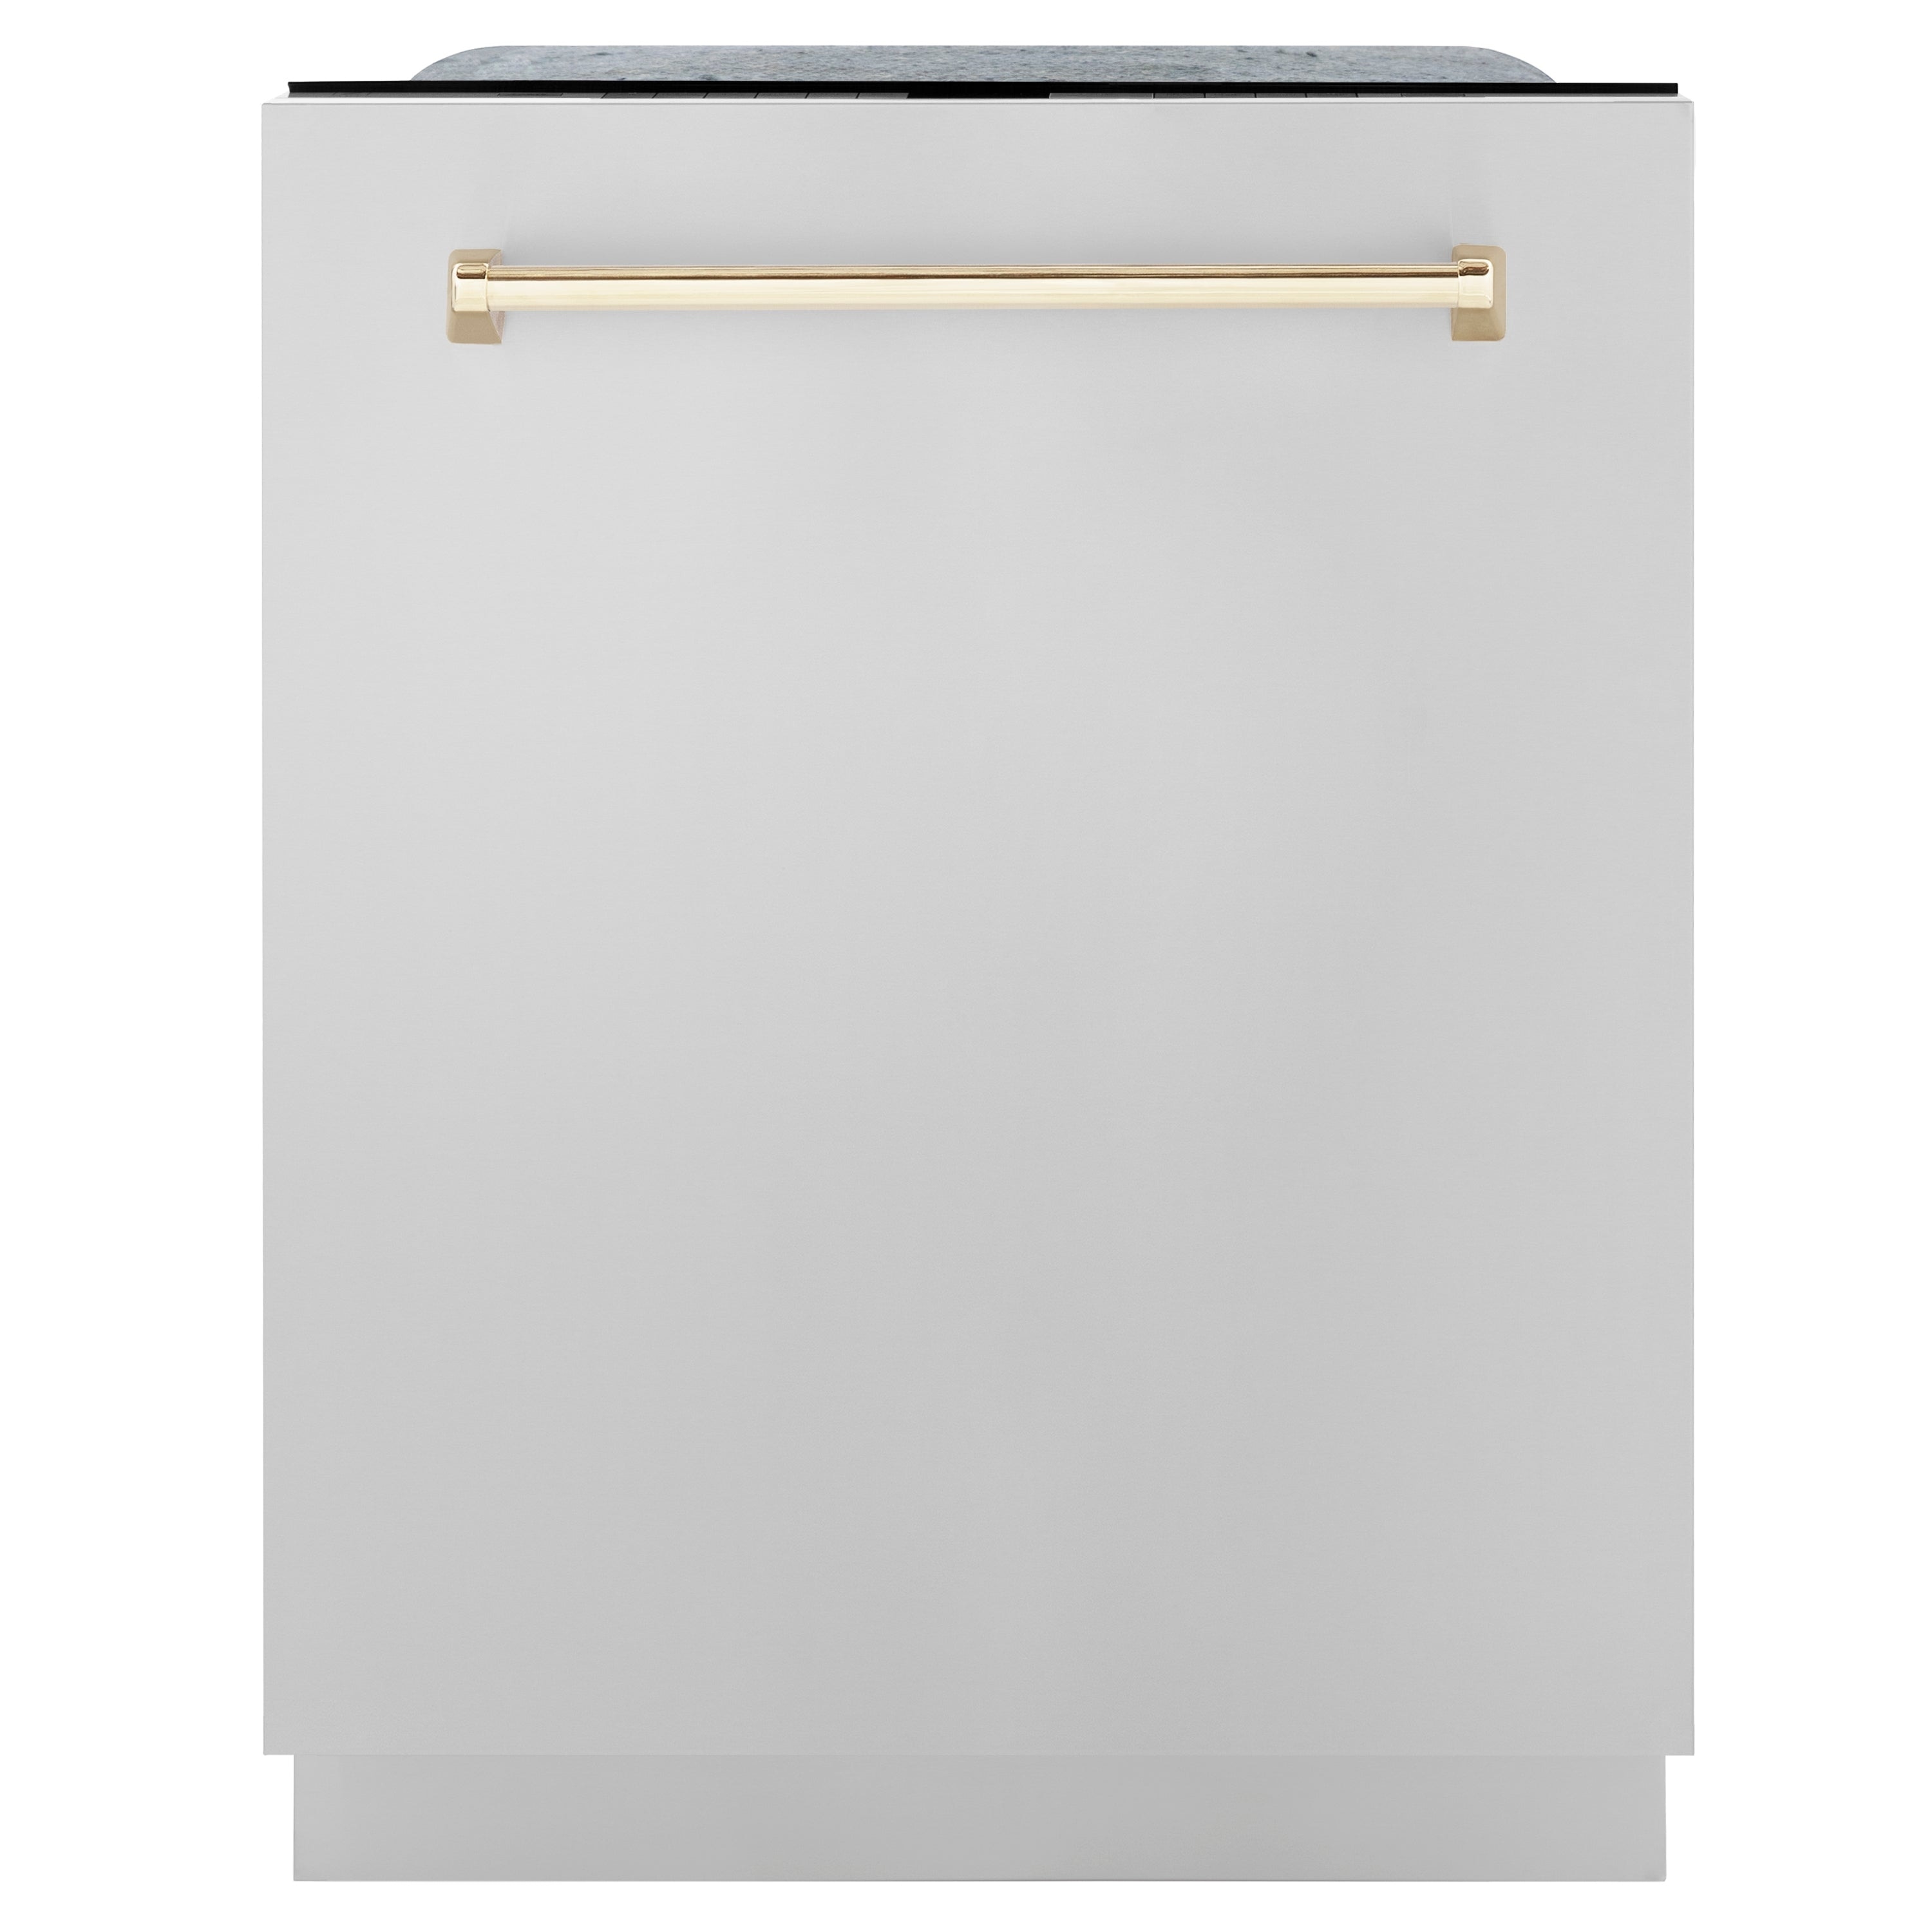 Zline Kitchen and Bath ZLINE Autograph Edition 24" 3rd Rack Top Touch Control Tall Tub Dishwasher in Stainless Steel